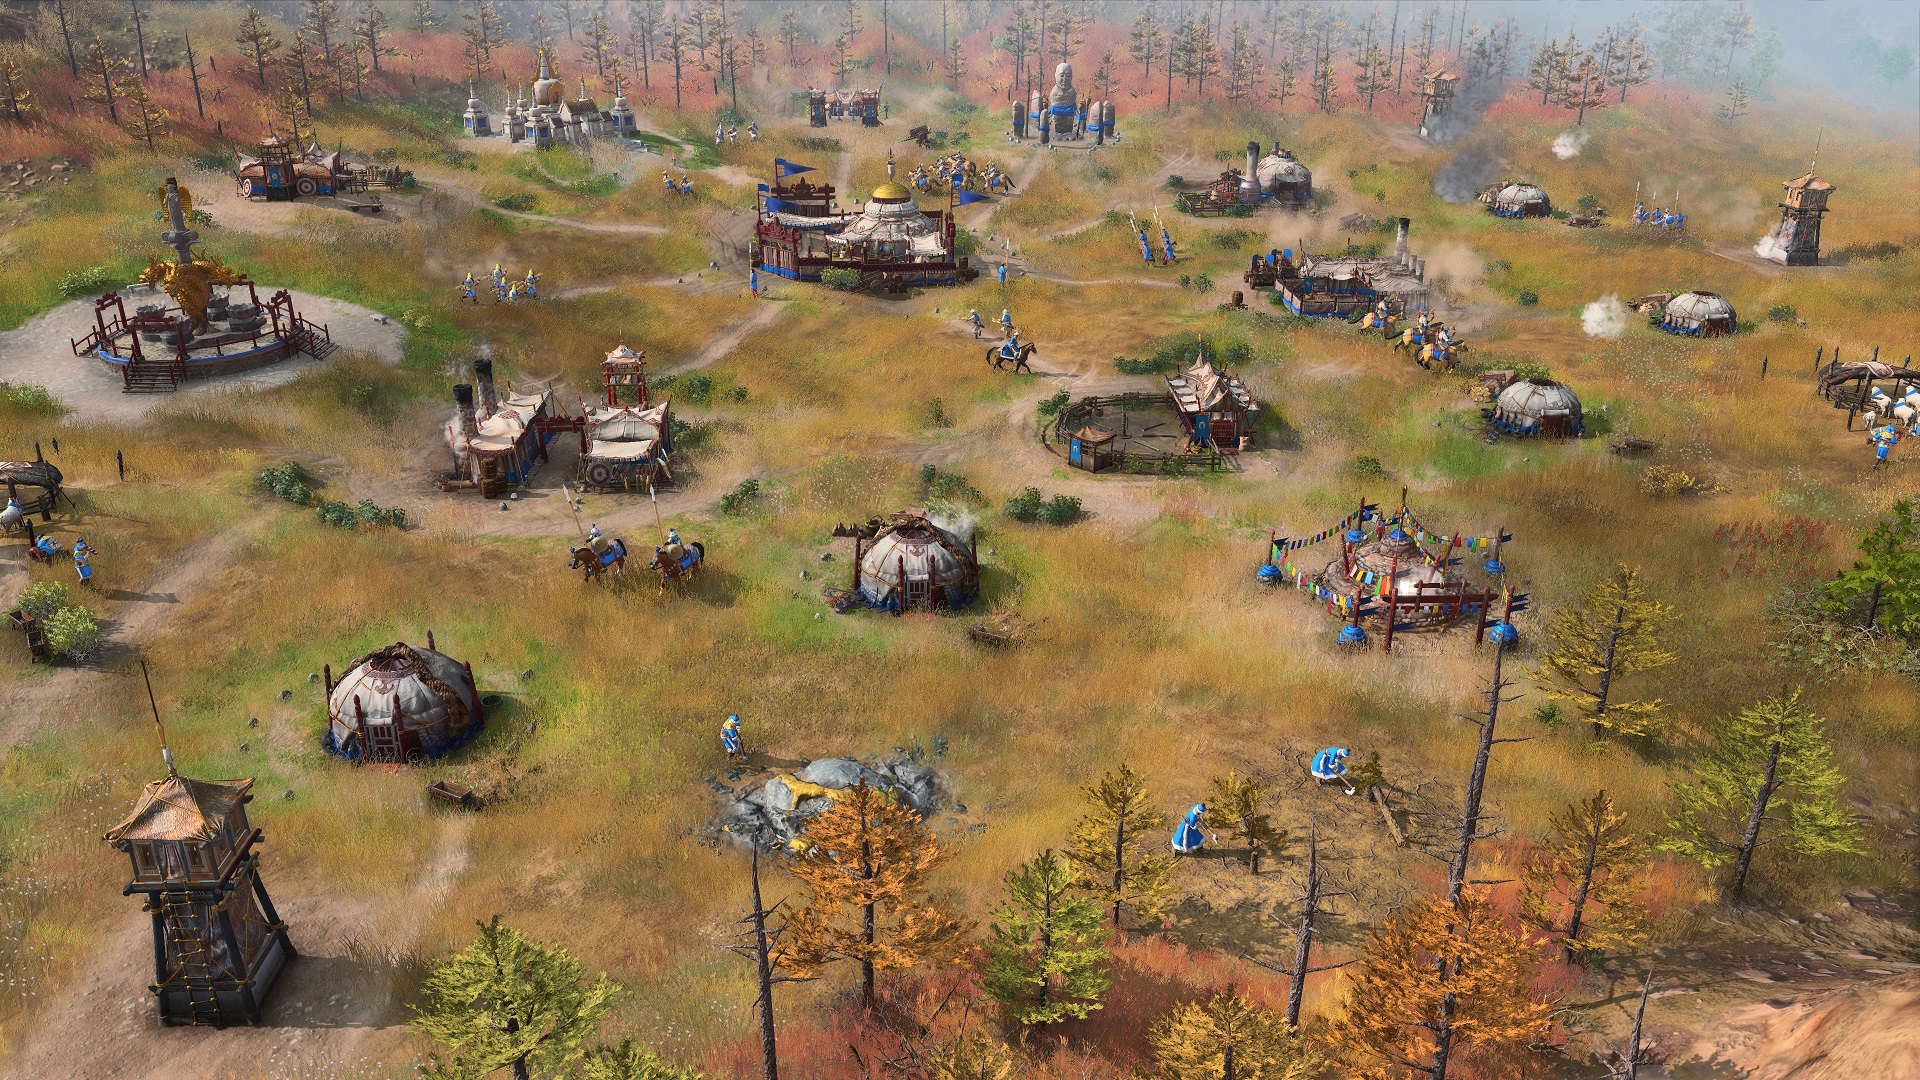 Age Of Empires Iv Fan Event Preview Drops Juicy Details (2)